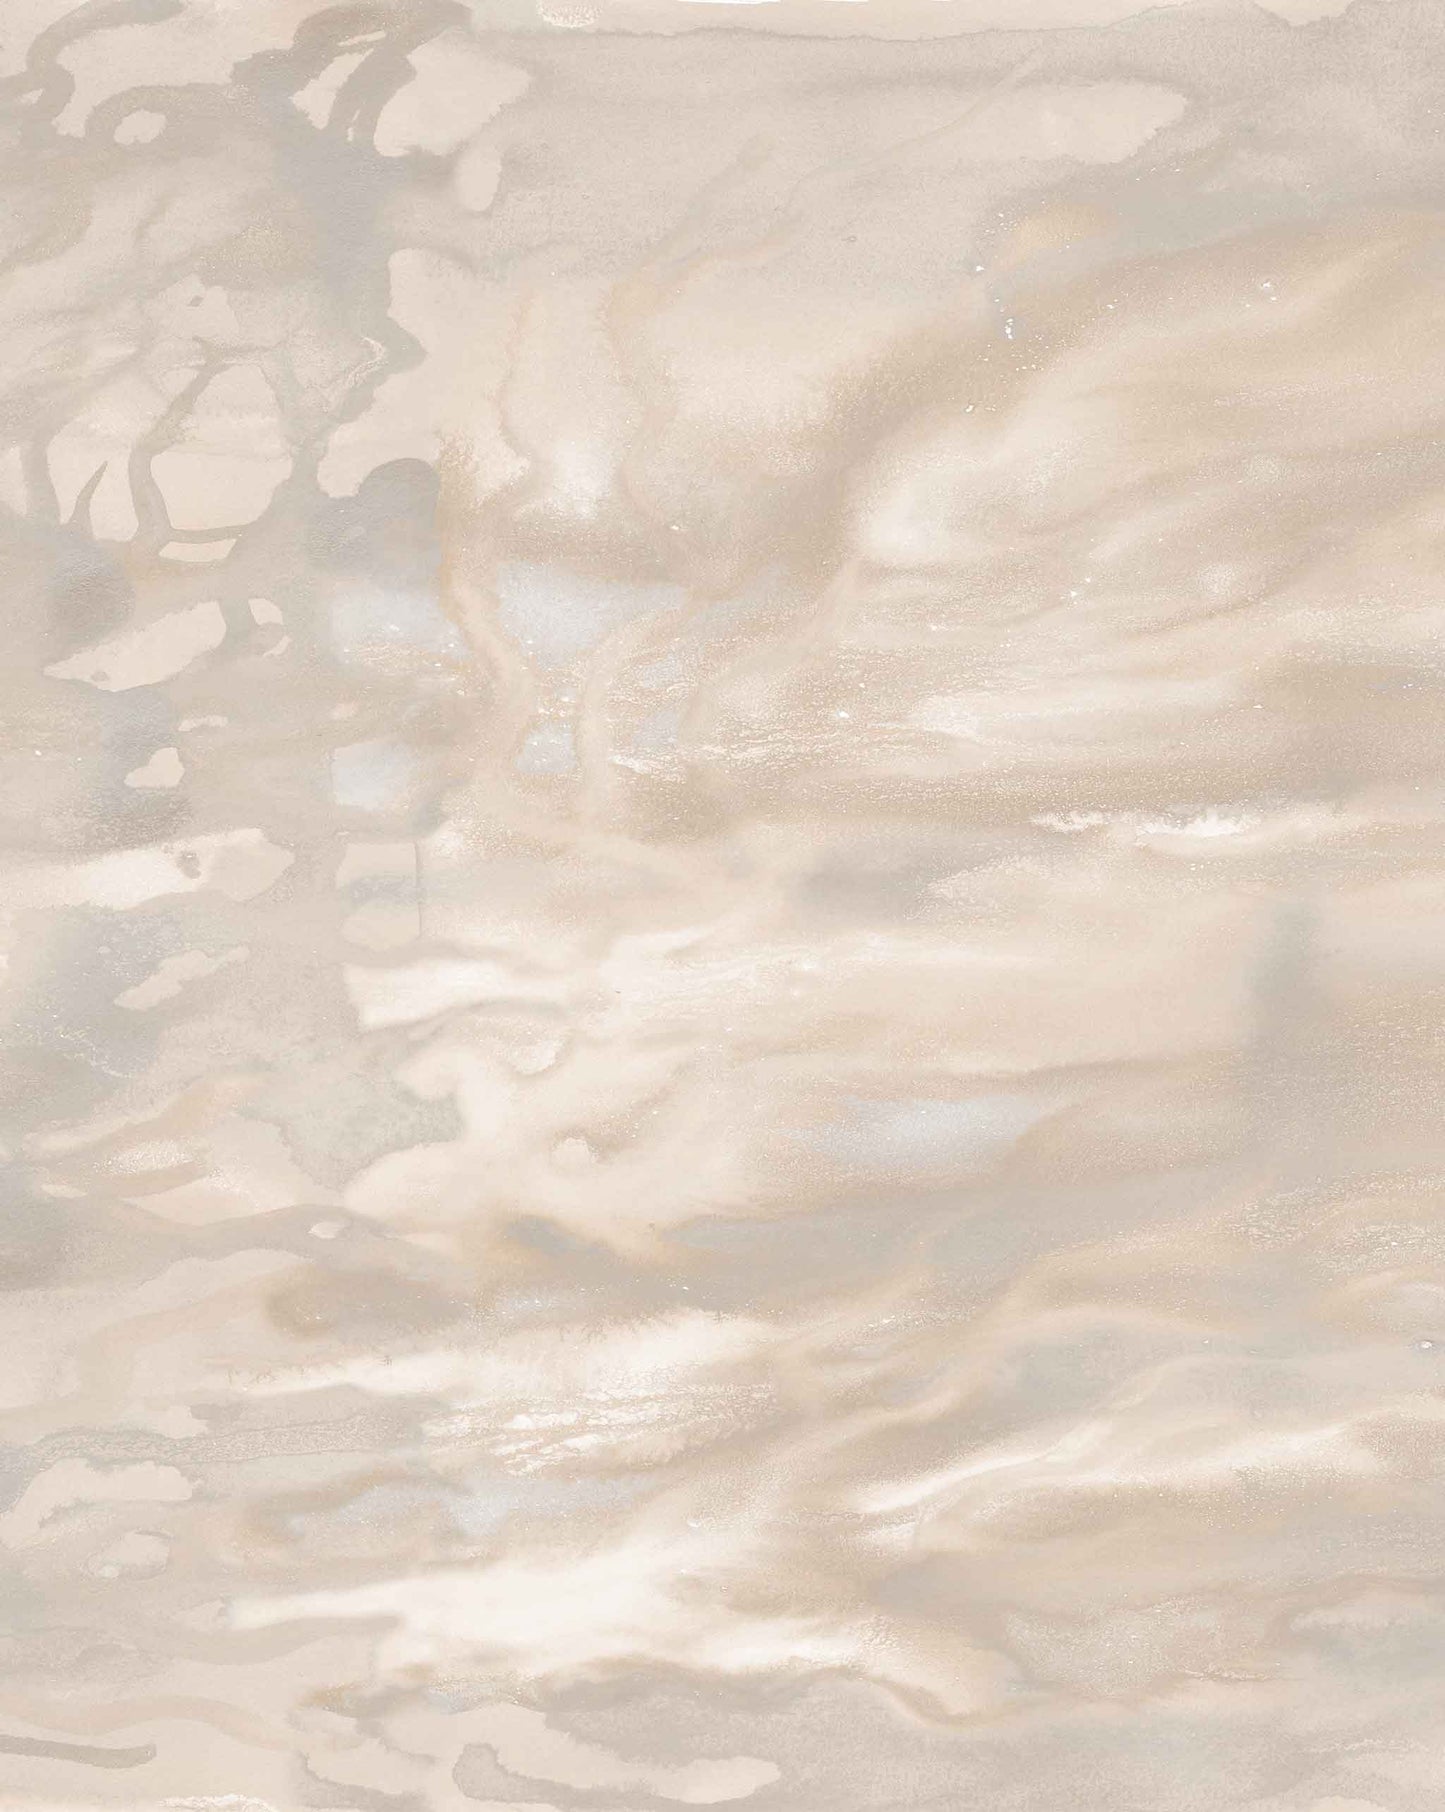 Abstract beige watercolor painting with fluid, Delta Wallpaper Mural ||Camel design patterns in various shades of brown and cream.